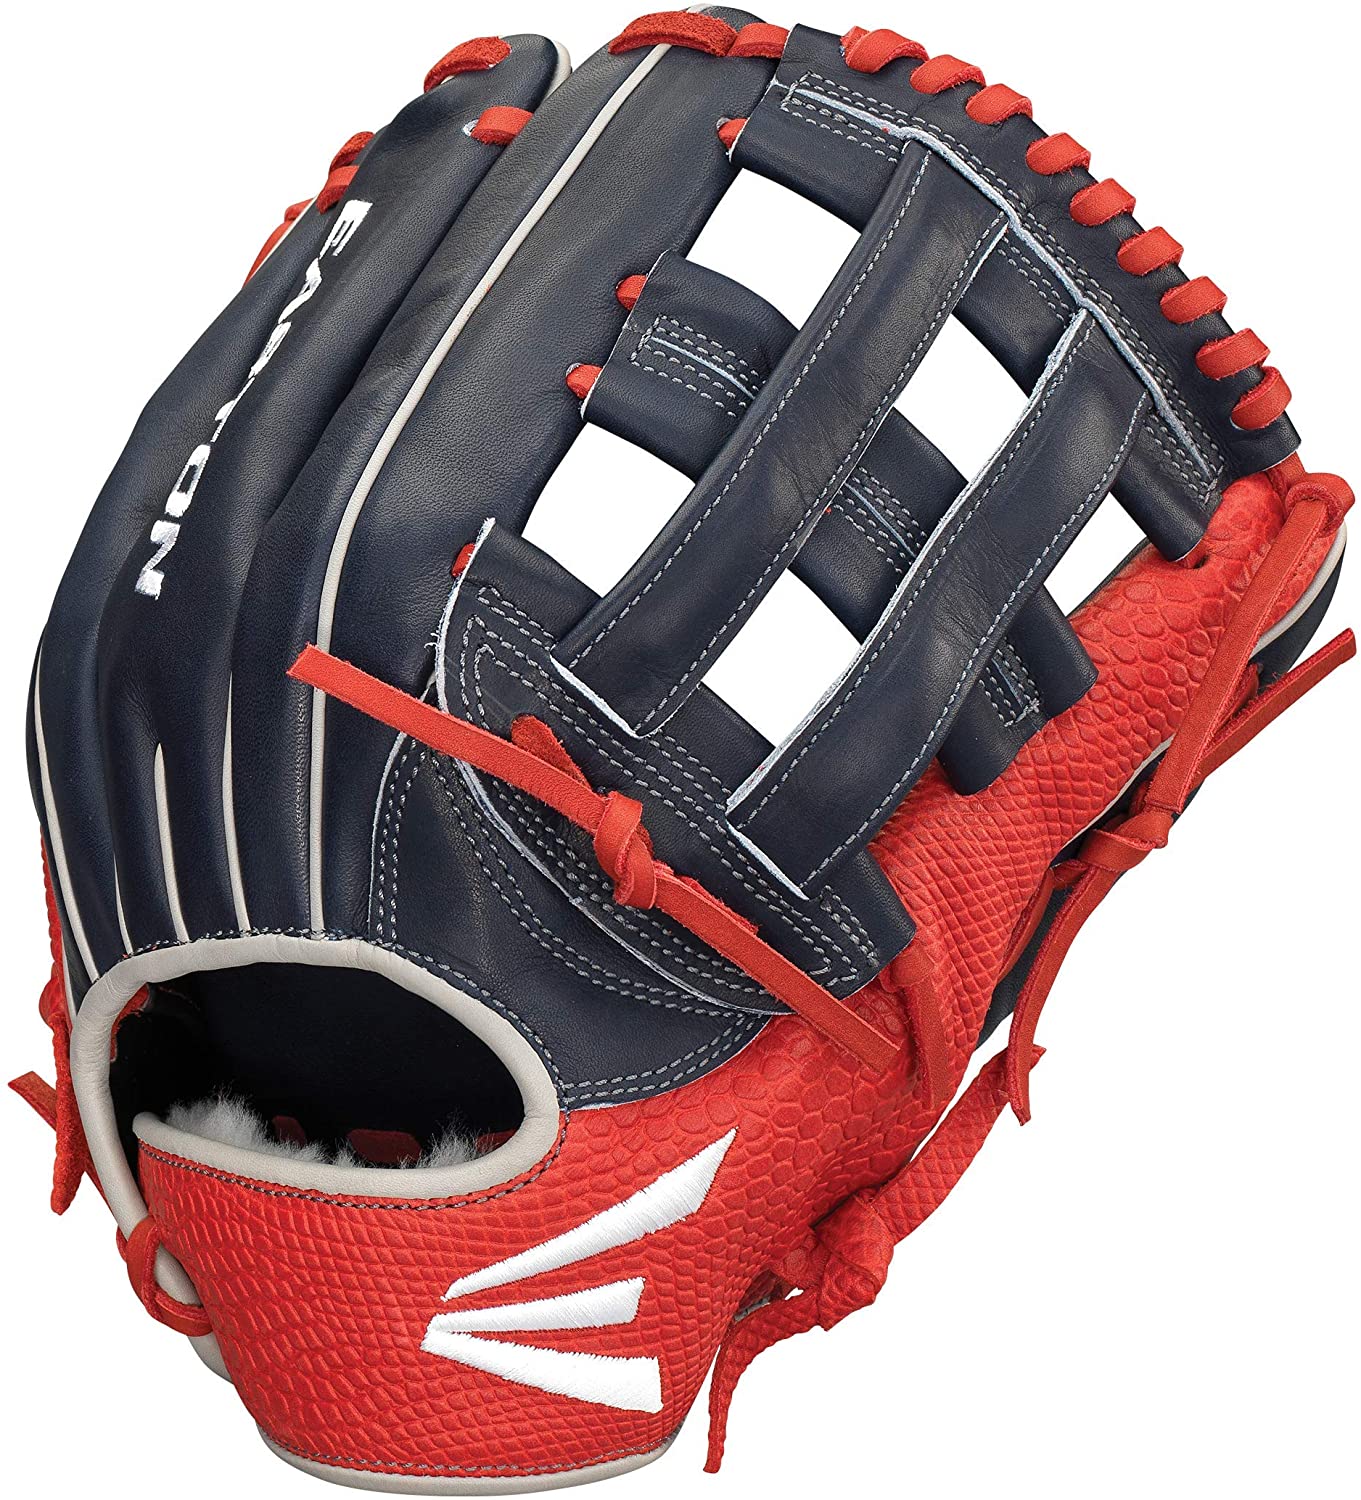 easton-pro-reserve-baseball-glove-jose-ramirez-12-right-hand-throw PRC43JR-RightHandThrow Easton  Step on to the field like a Pro with Easton’s all-new